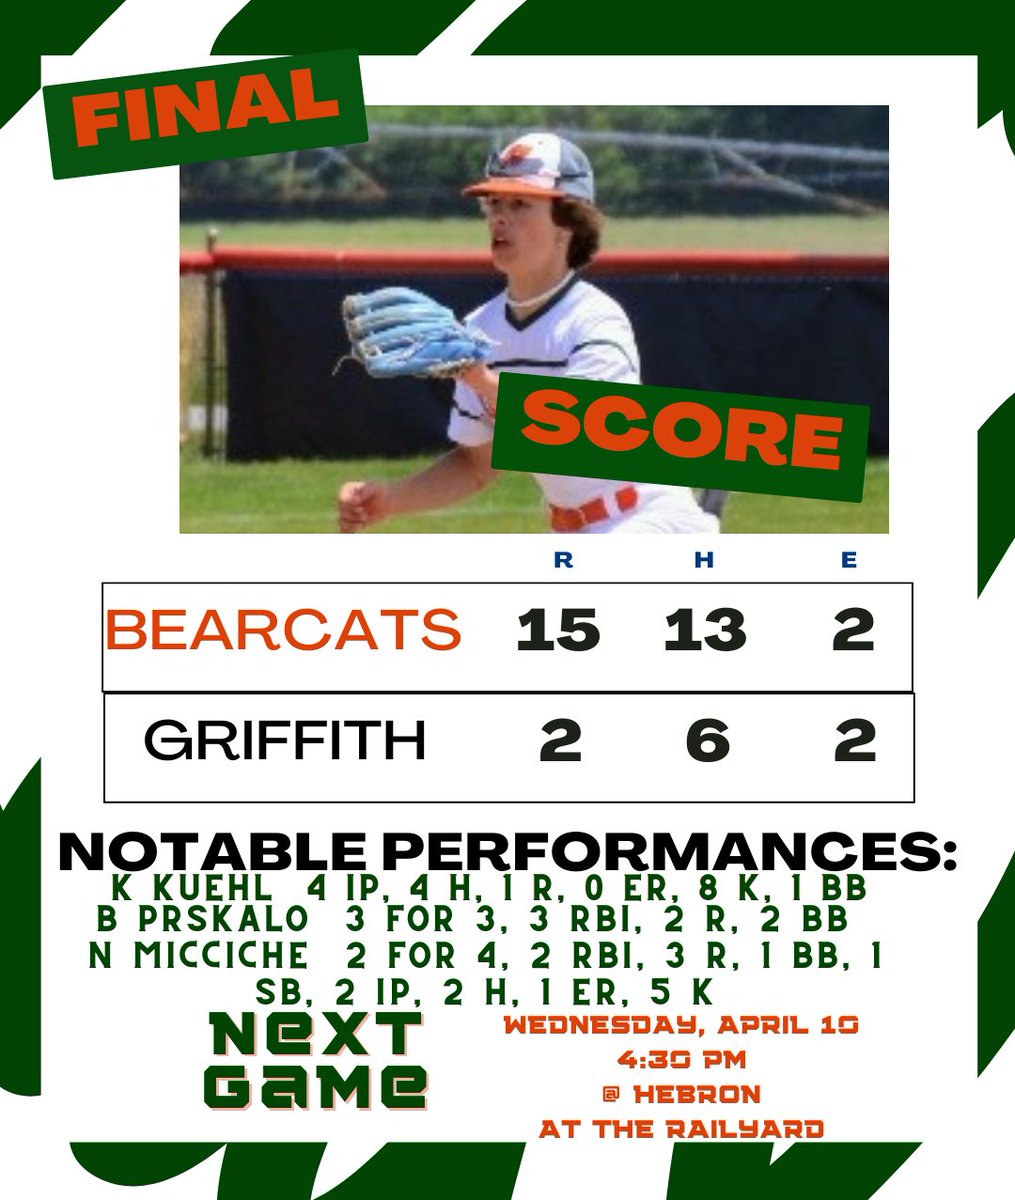 Big win for the Bearcats! Make sure to come out to The Railyard tomorrow at 4:30 to see your boys take on Hebron.